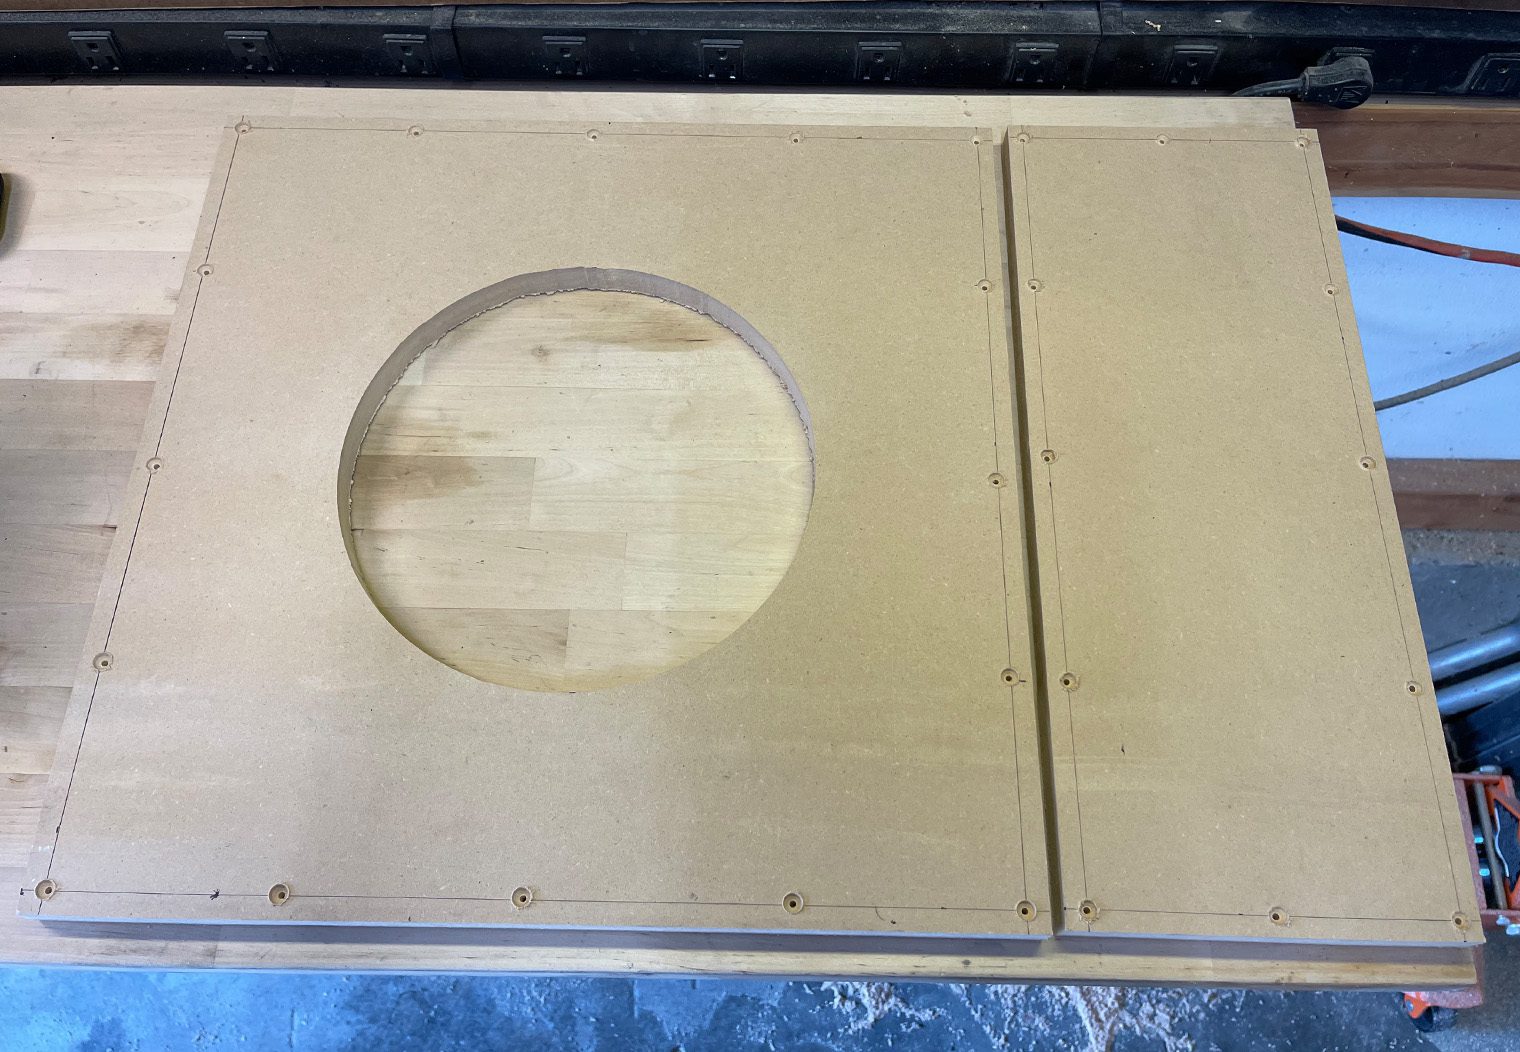 Picture of the subwoofer enclosure panels predrilled before assembly